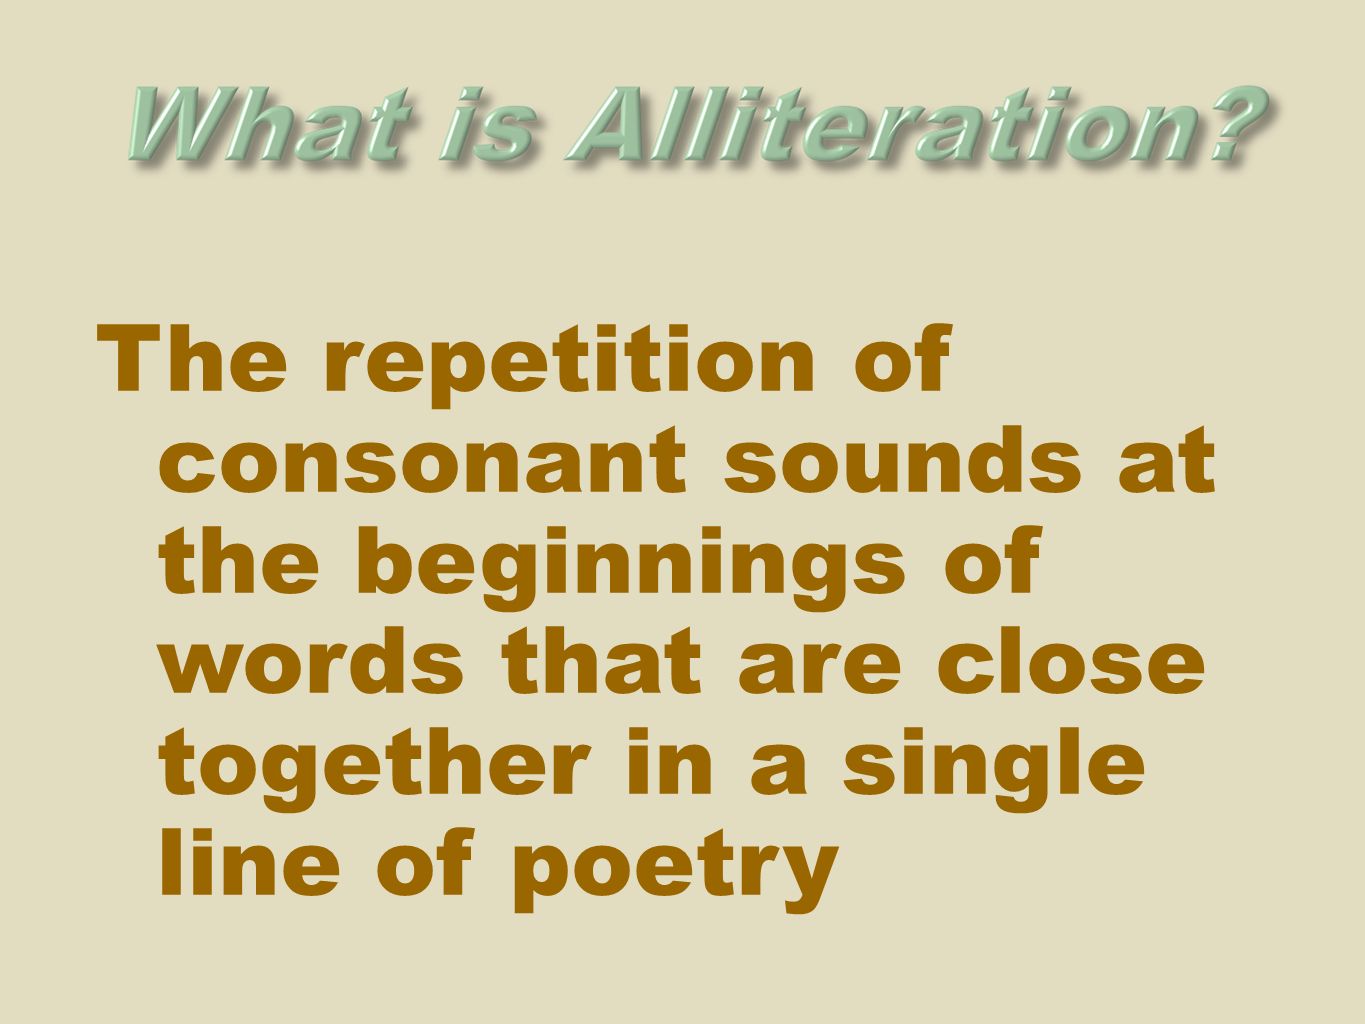 The repetition of consonant sounds at the beginnings of words that are close together in a single line of poetry